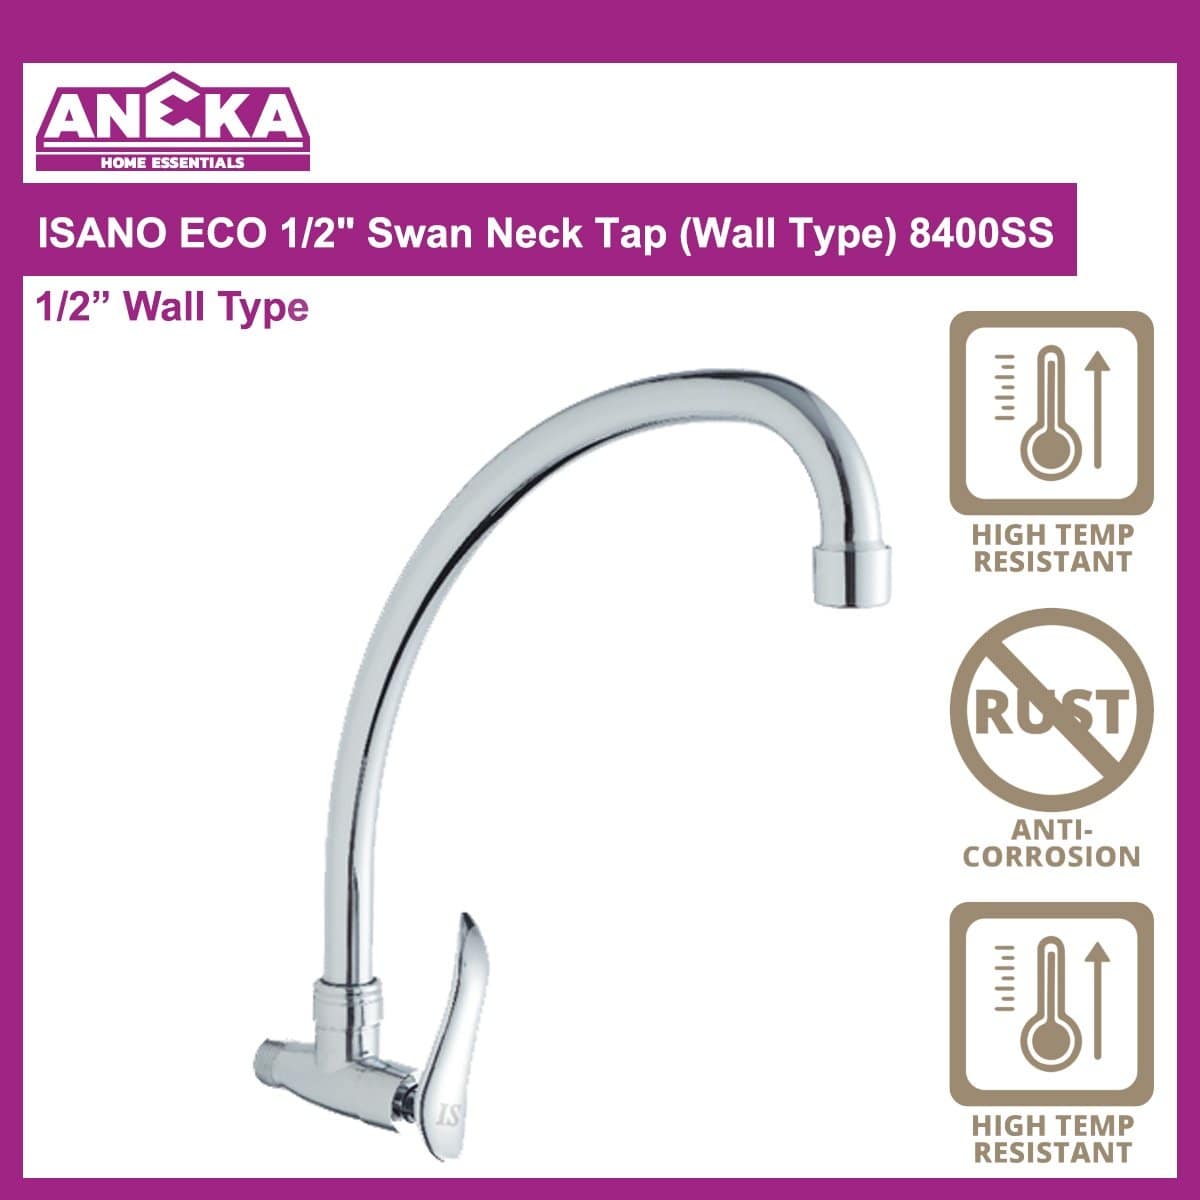 ISANO ECO 1/2" Swan Neck Tap (Wall Type) 8400SS